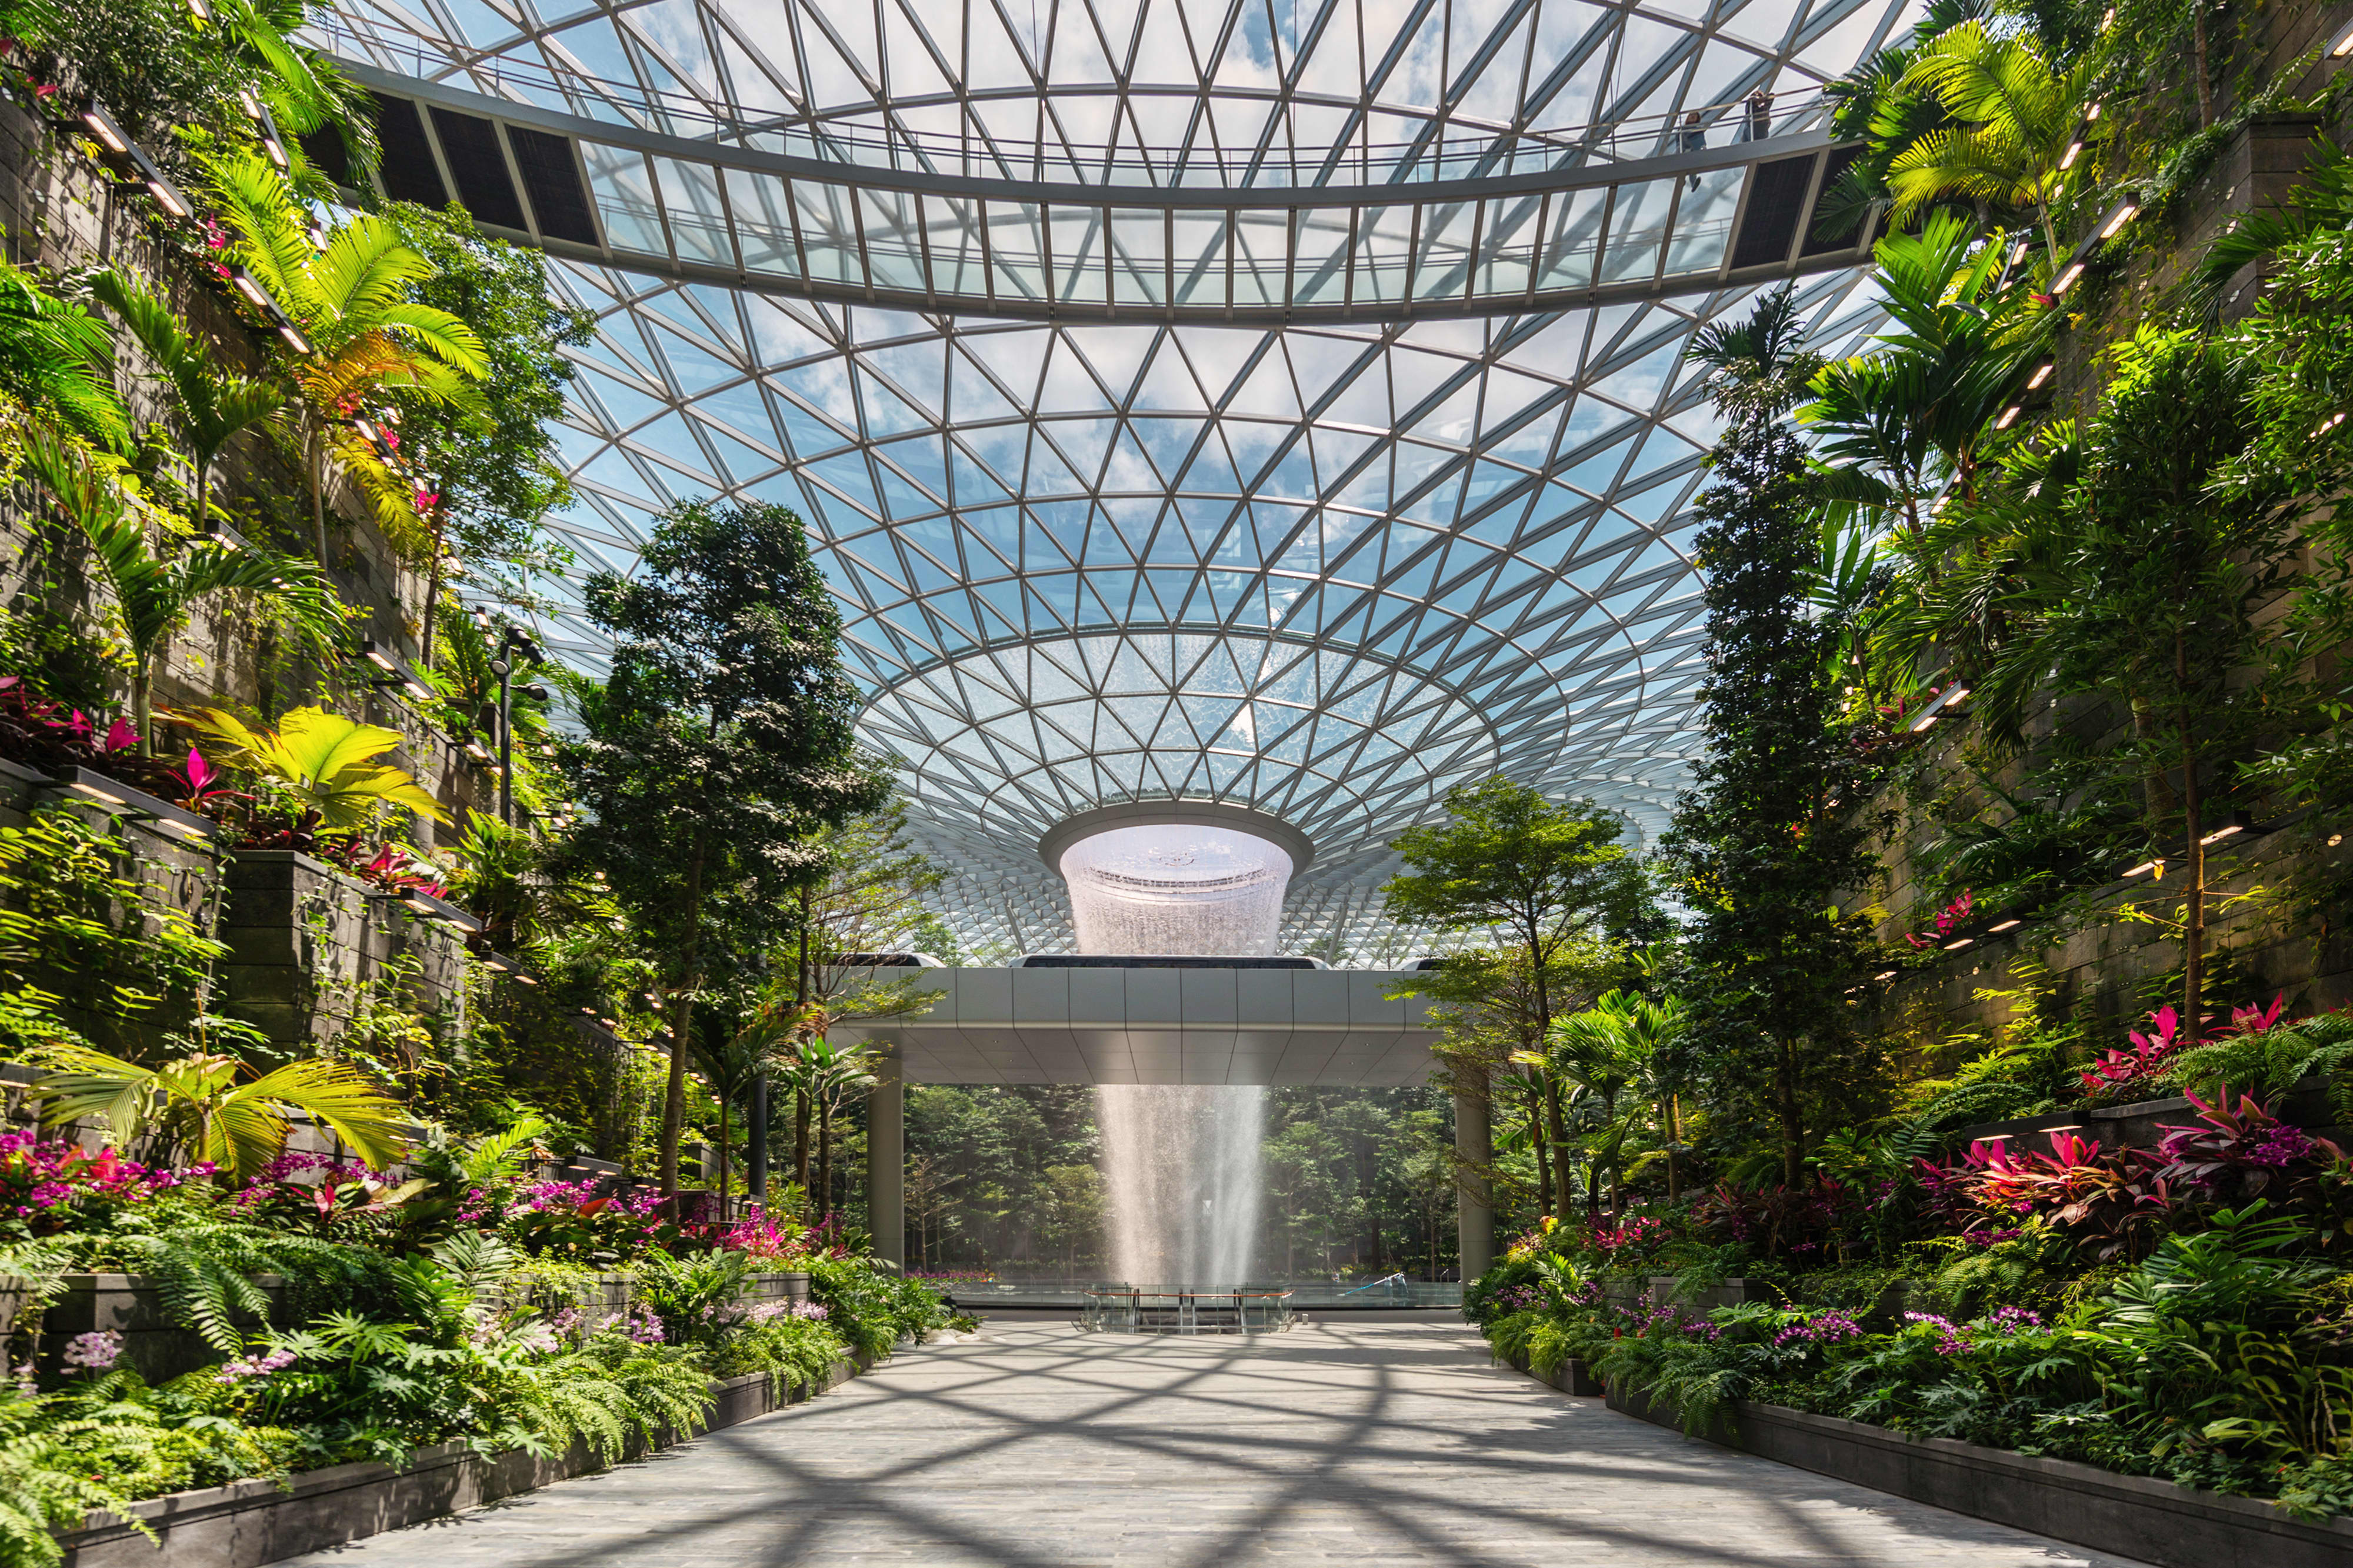 Singapore Changi Airport Images - IMAGESEE